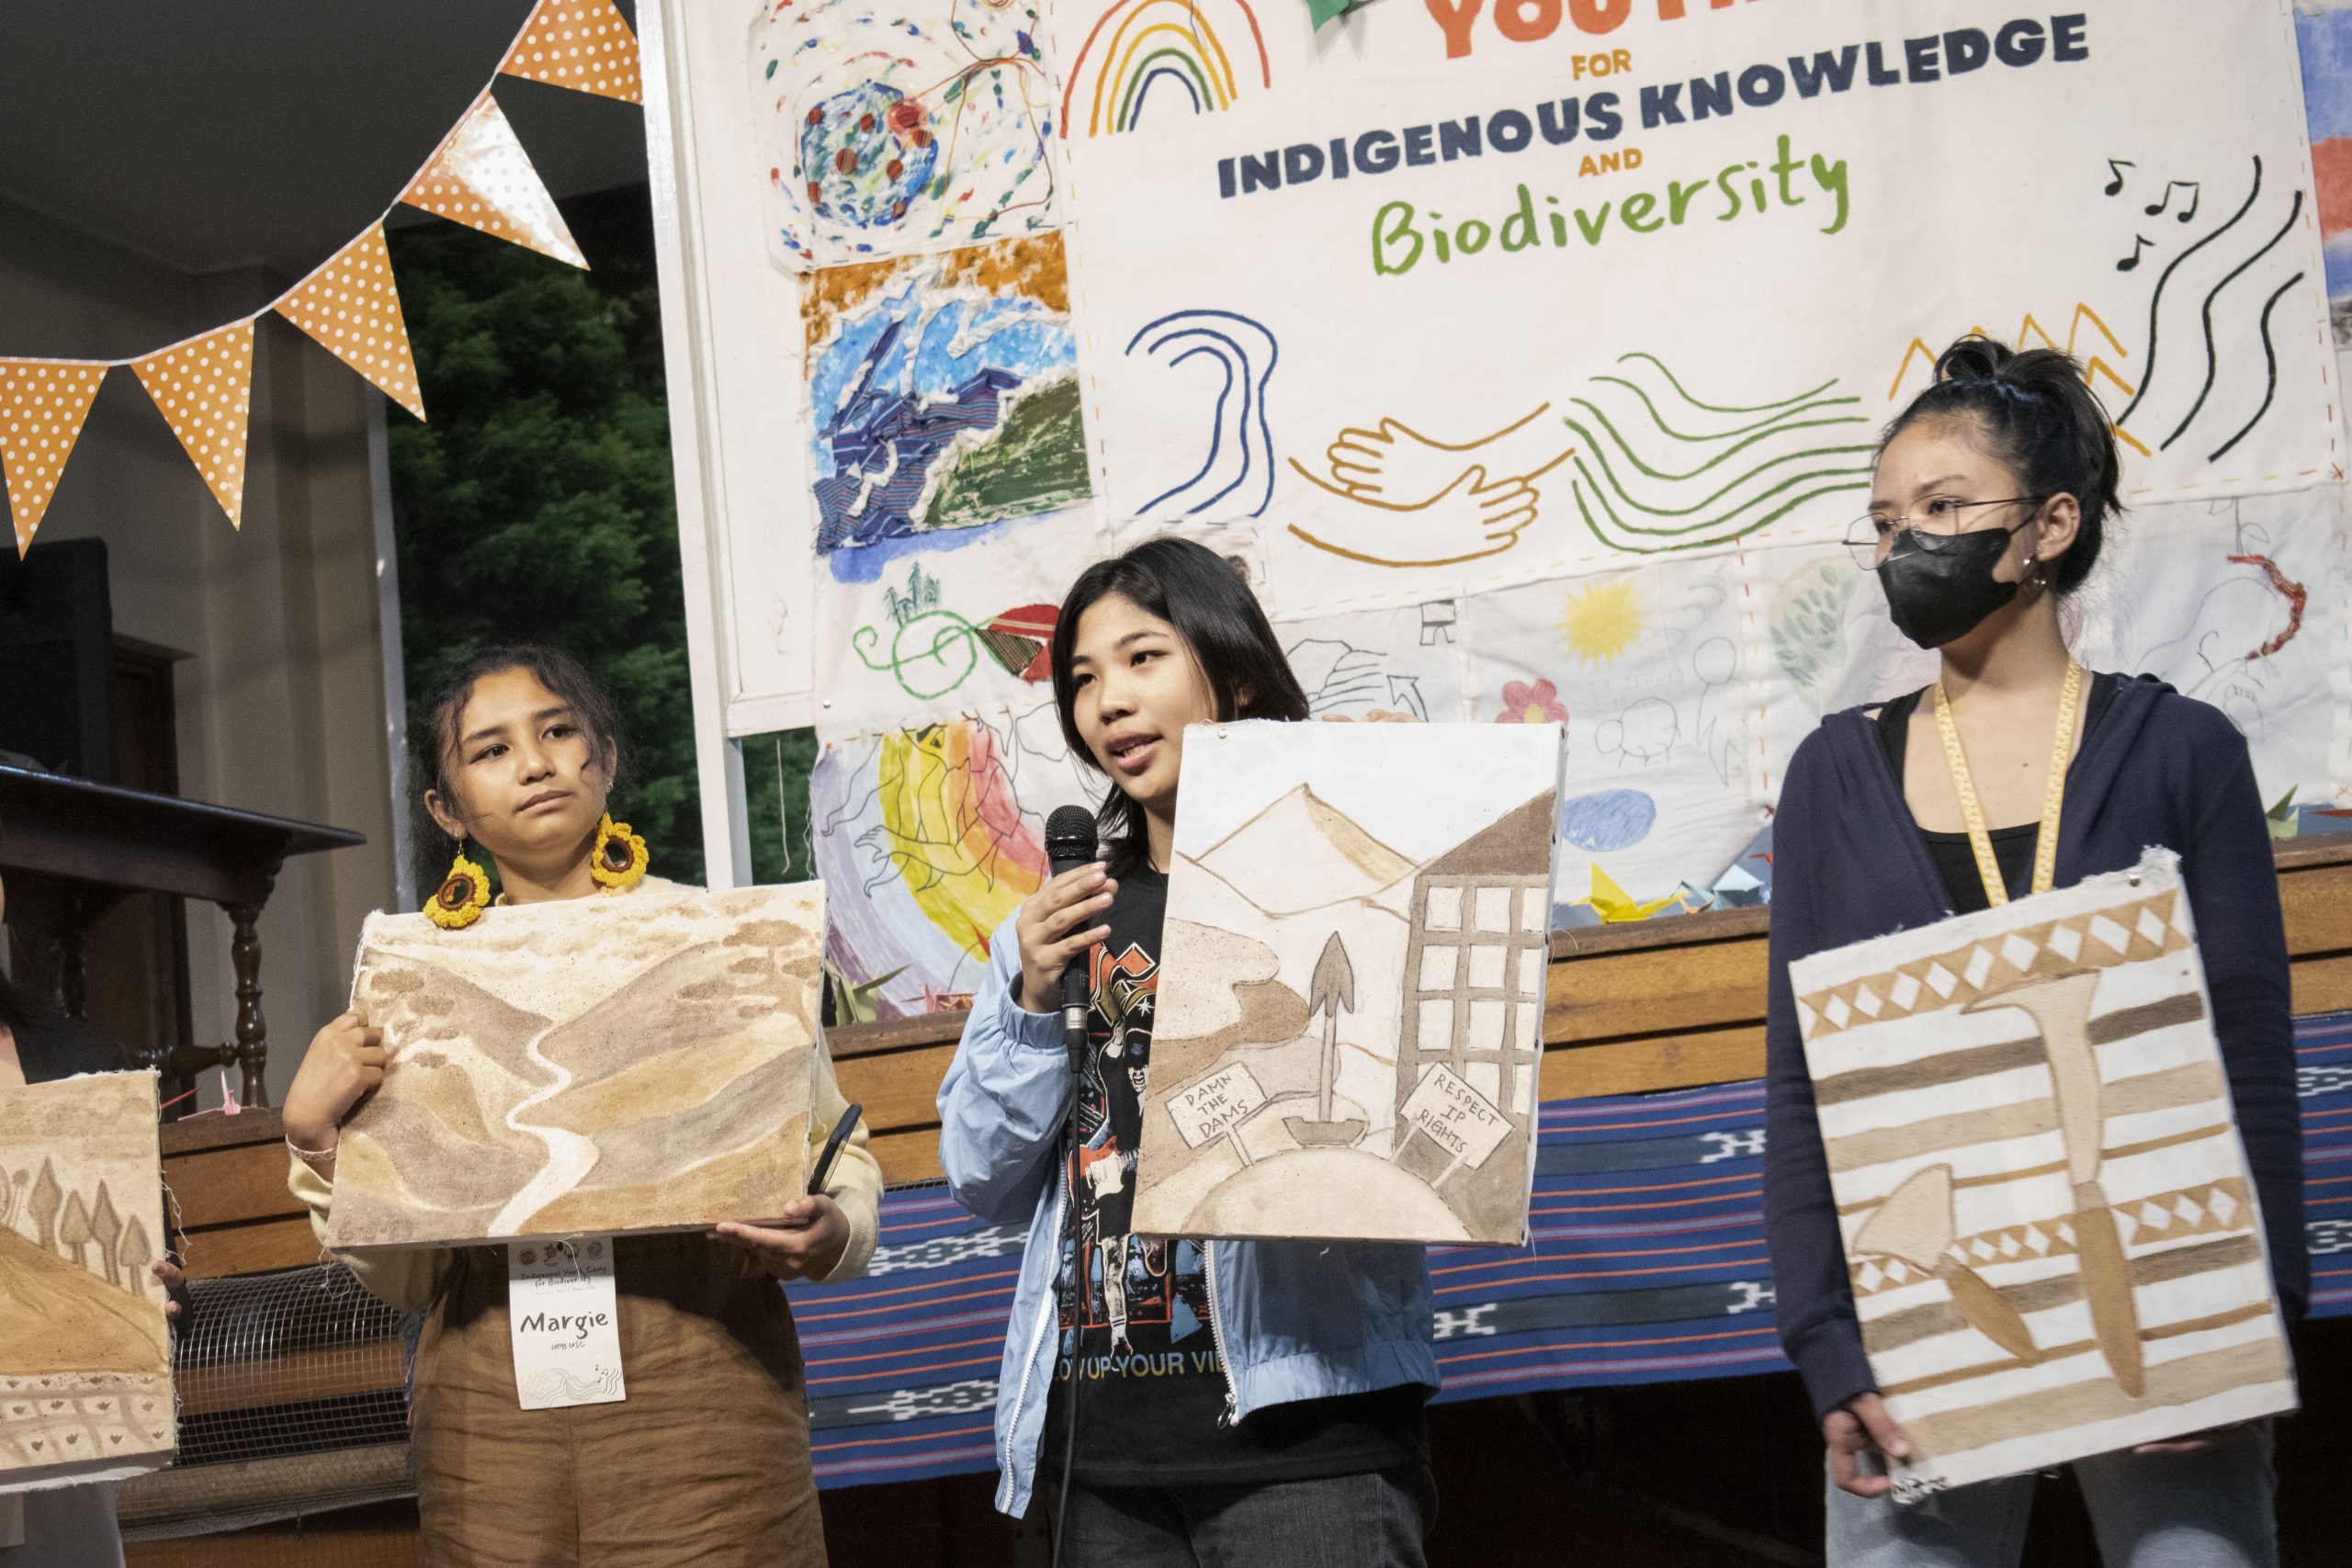 Youth for Indigenous Knowledge and Biodiversity